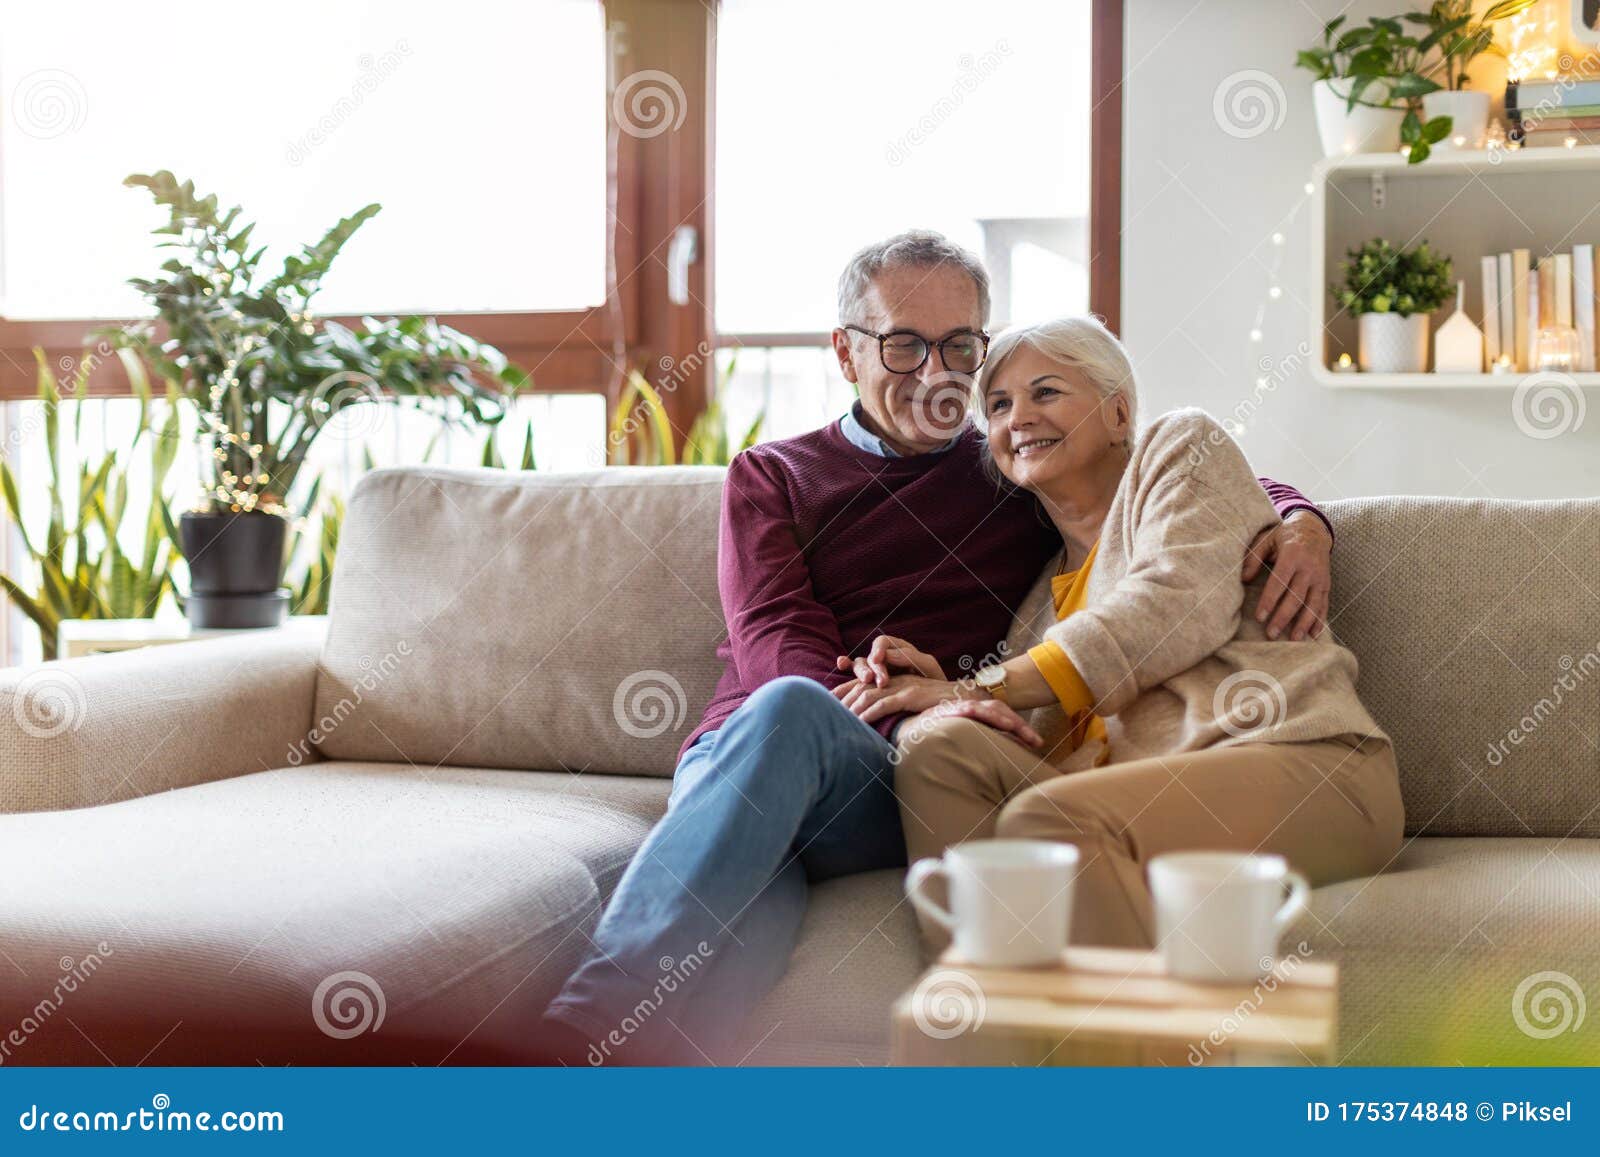 happy elderly couple relaxing together on the sofa at home